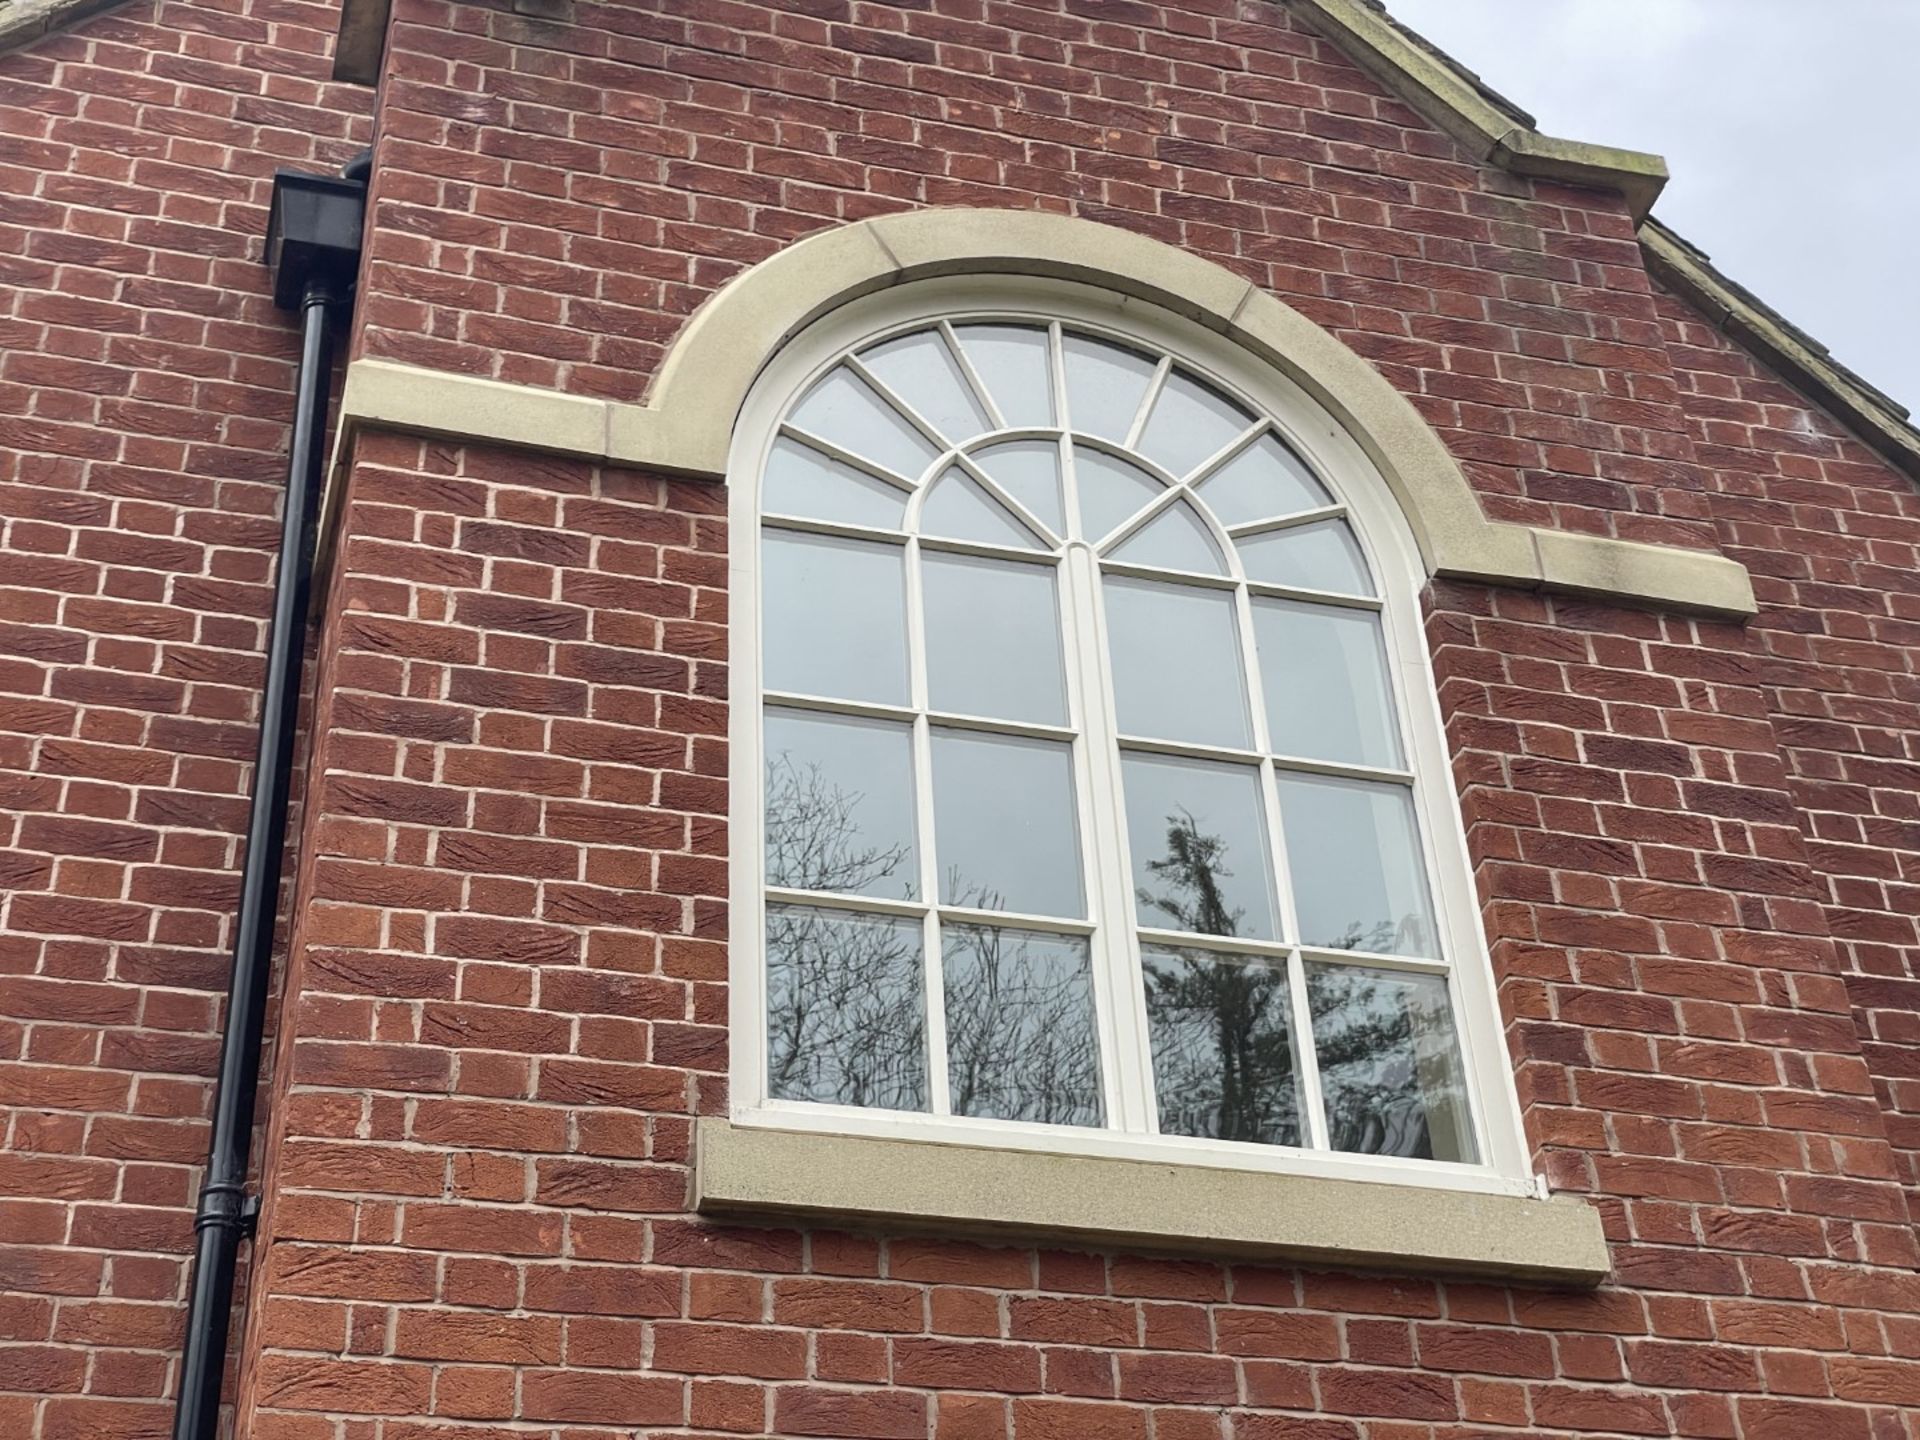 1 x Hardwood Timber Double Glazed Arch Window Frame - Ref: PAN217 / ARCH - CL896 - NO VAT - Image 24 of 24